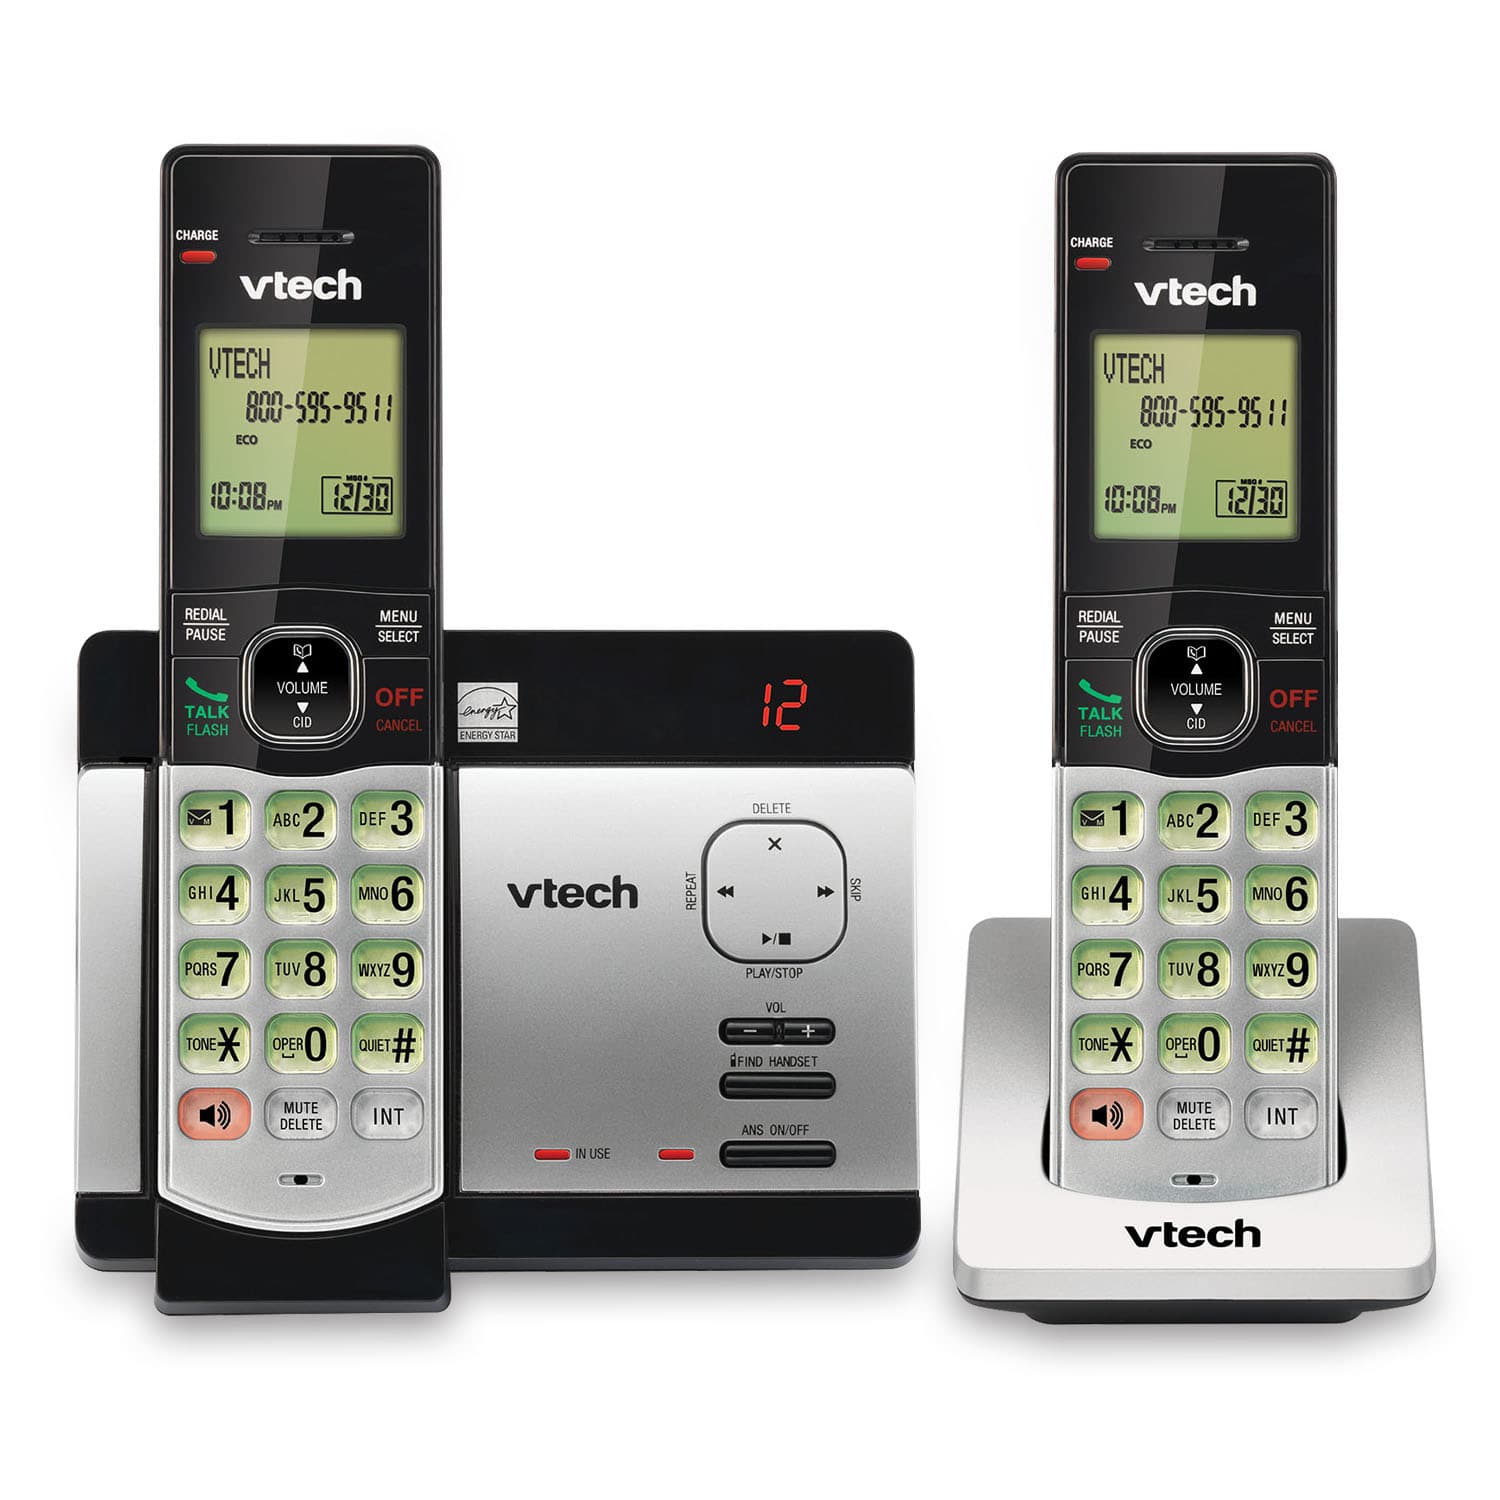 2 Handset Cordless Phone System with Caller ID/Call Waiting